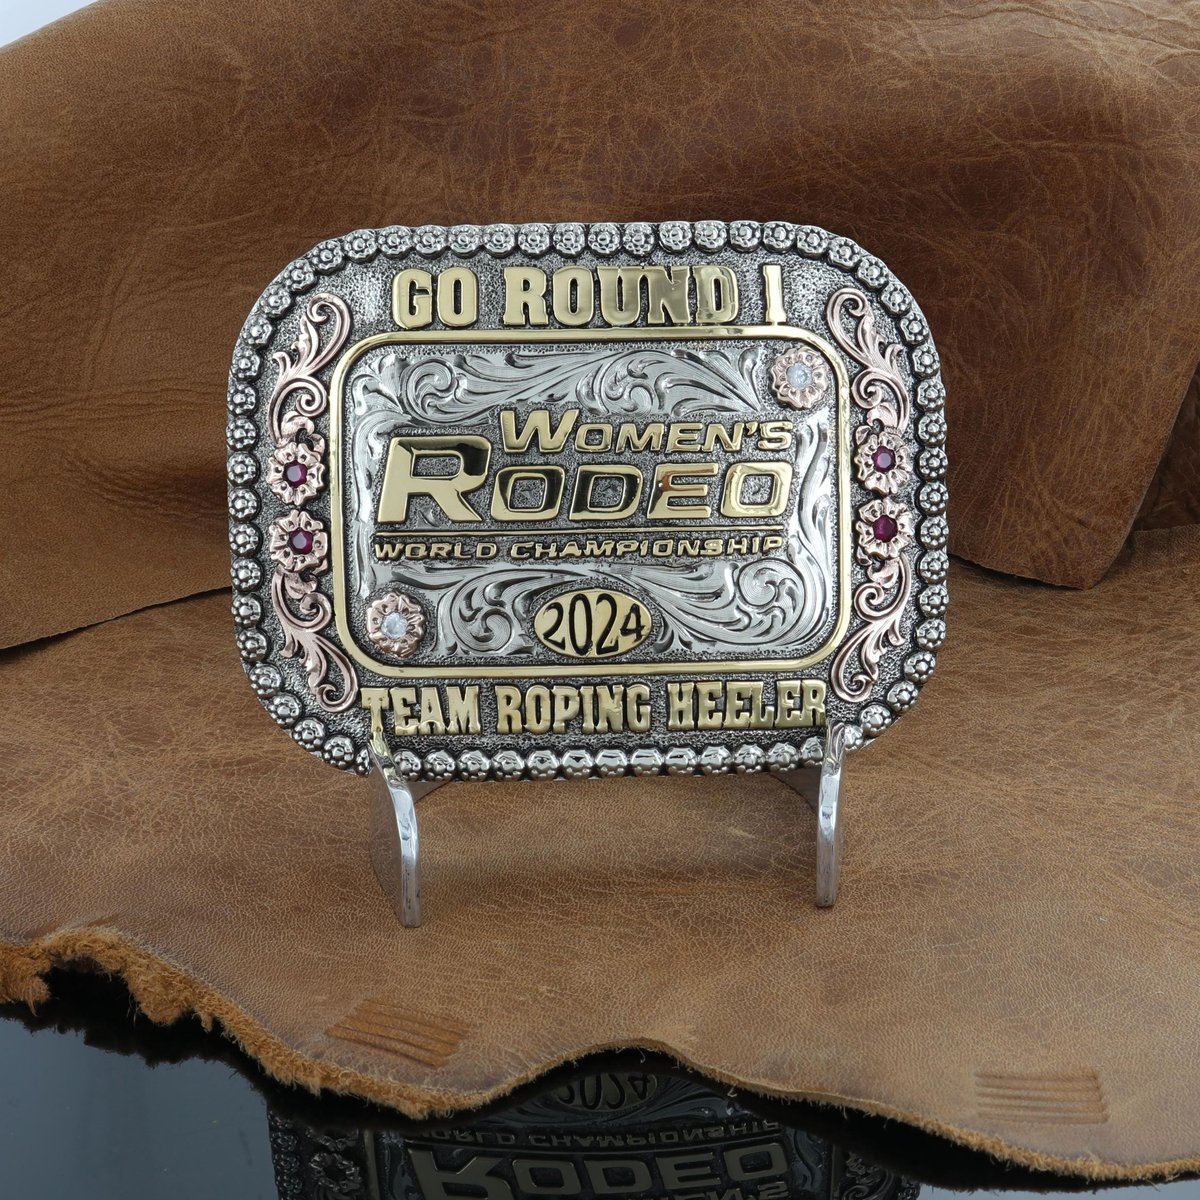 Today kicks off round one of the Women’s Rodeo World Championships. Congratulations and good luck to all the competitors! If you are in Fort Worth stop by the Cowboy Channel Bar 30 minutes after the final run for the buckle ceremony! #MontanaSilversmiths #BrandofChampions